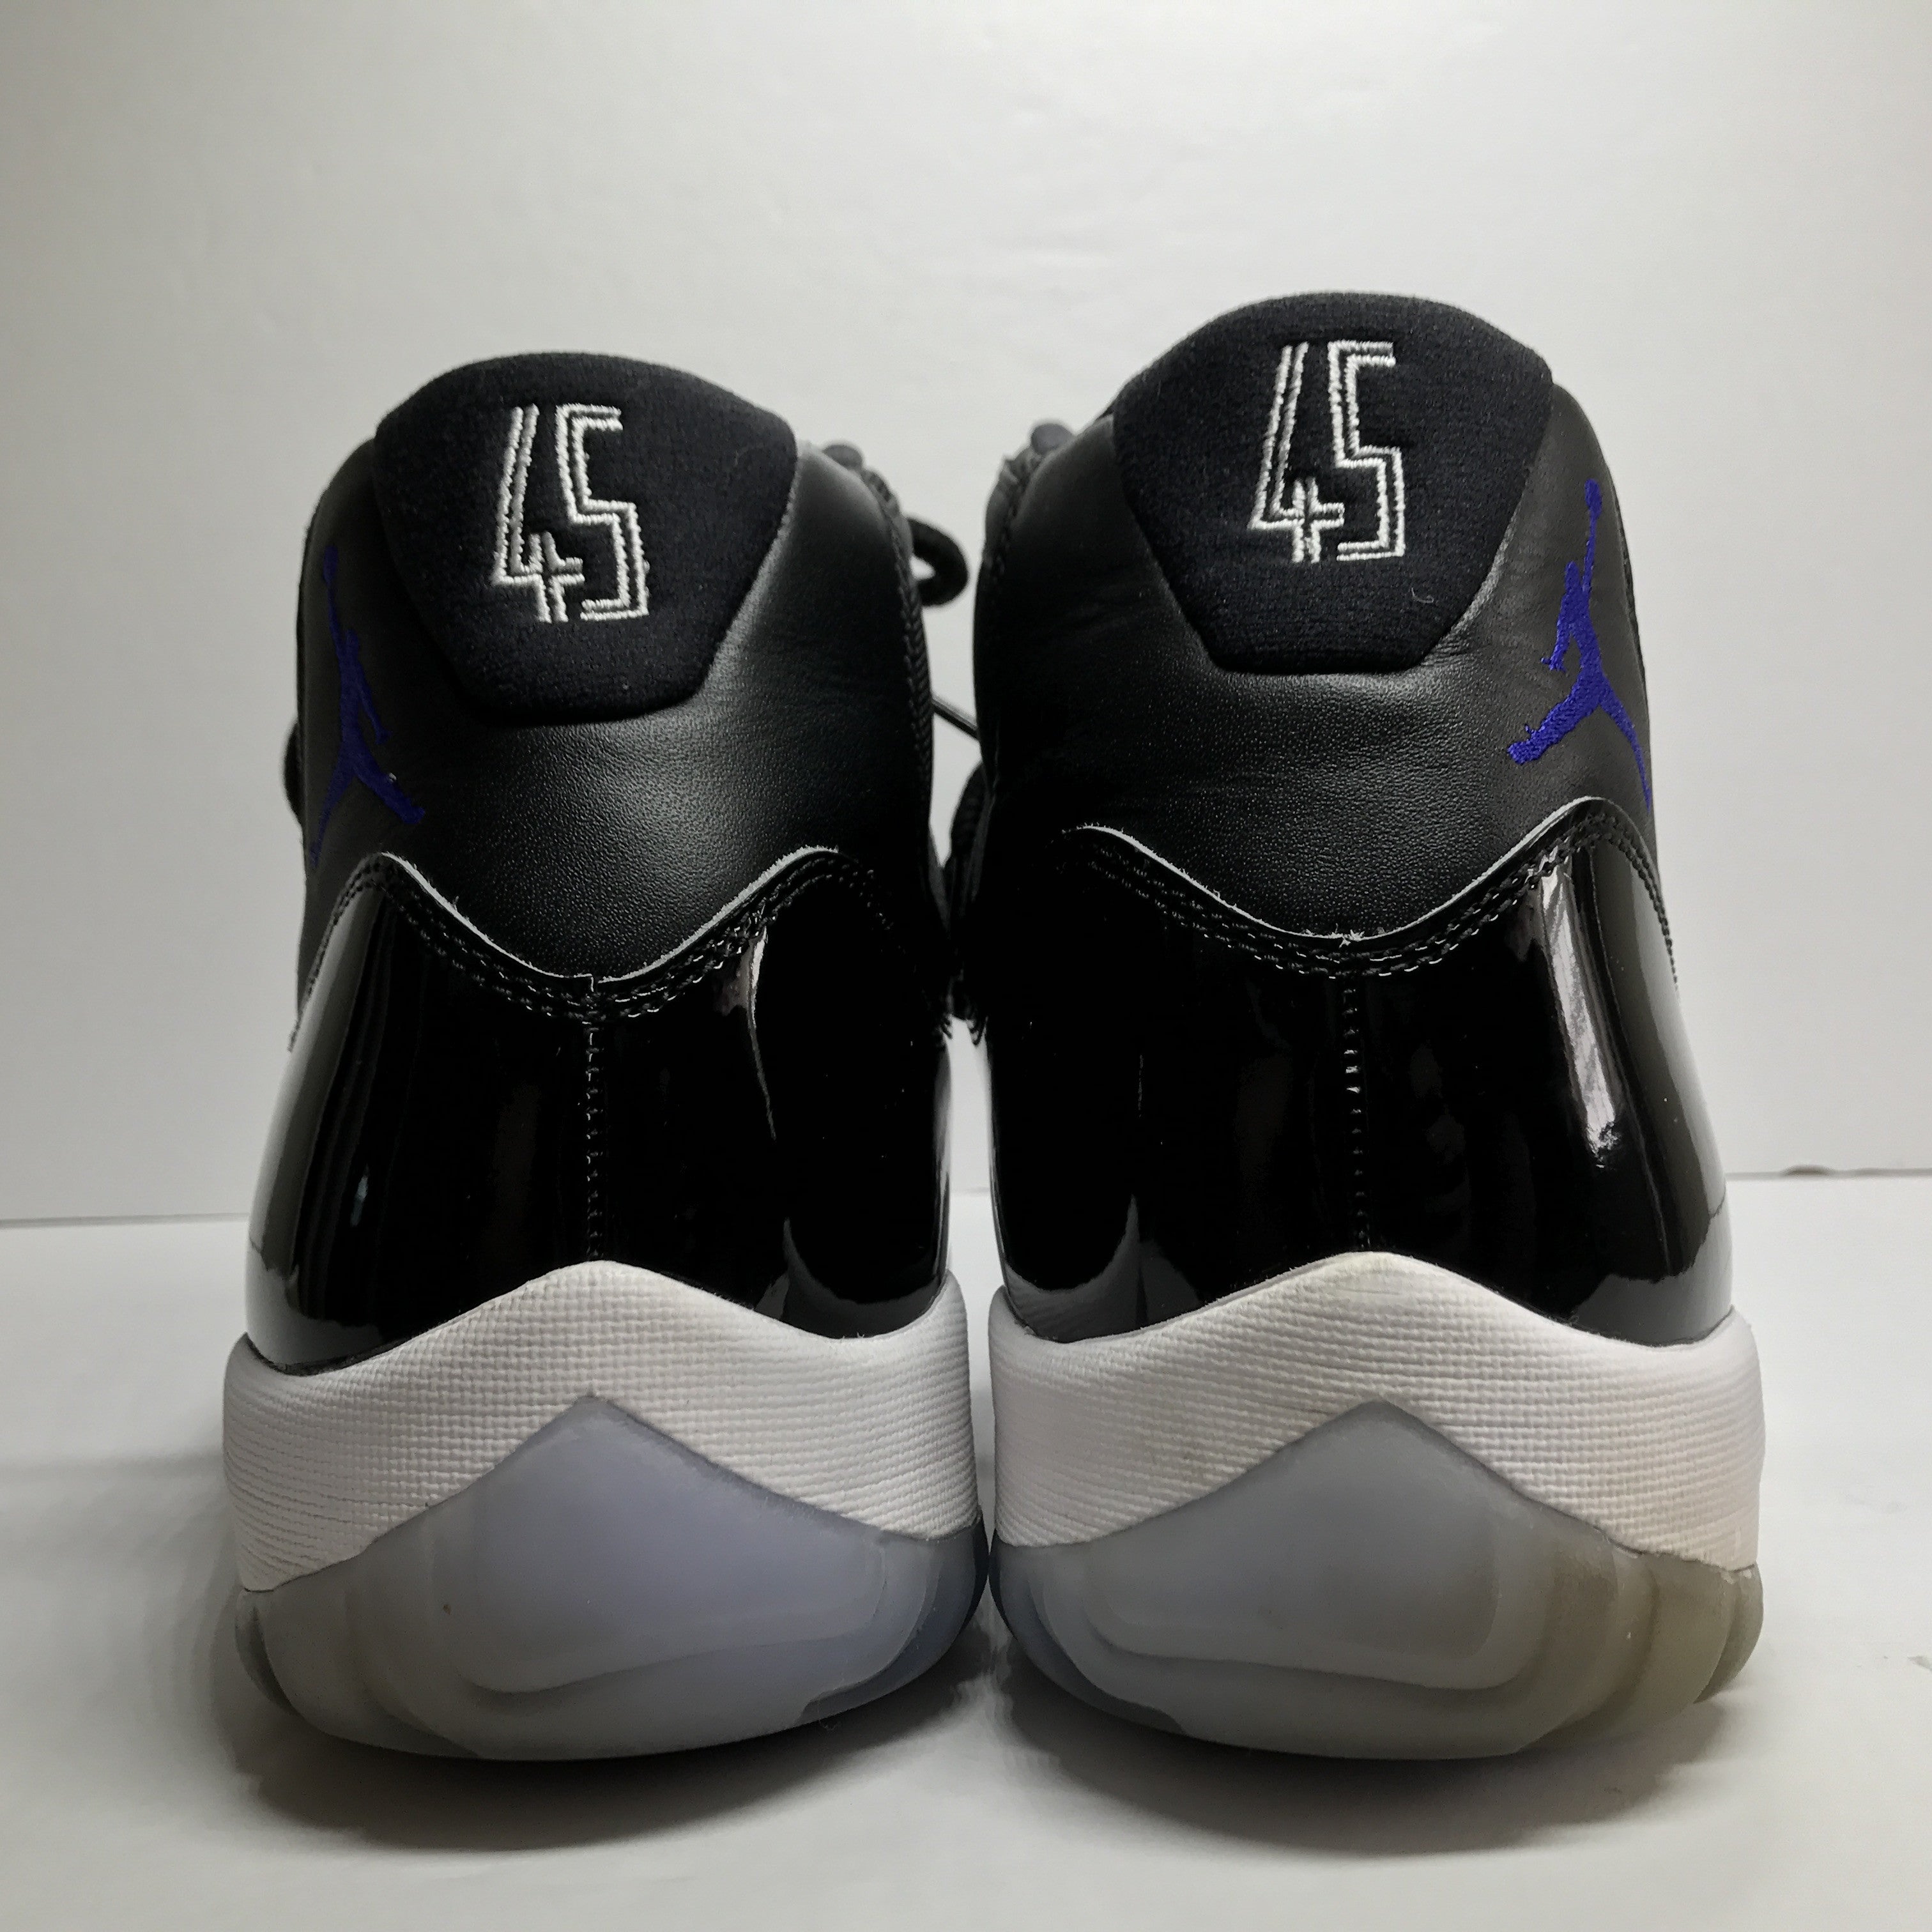 space jam 11 size 14